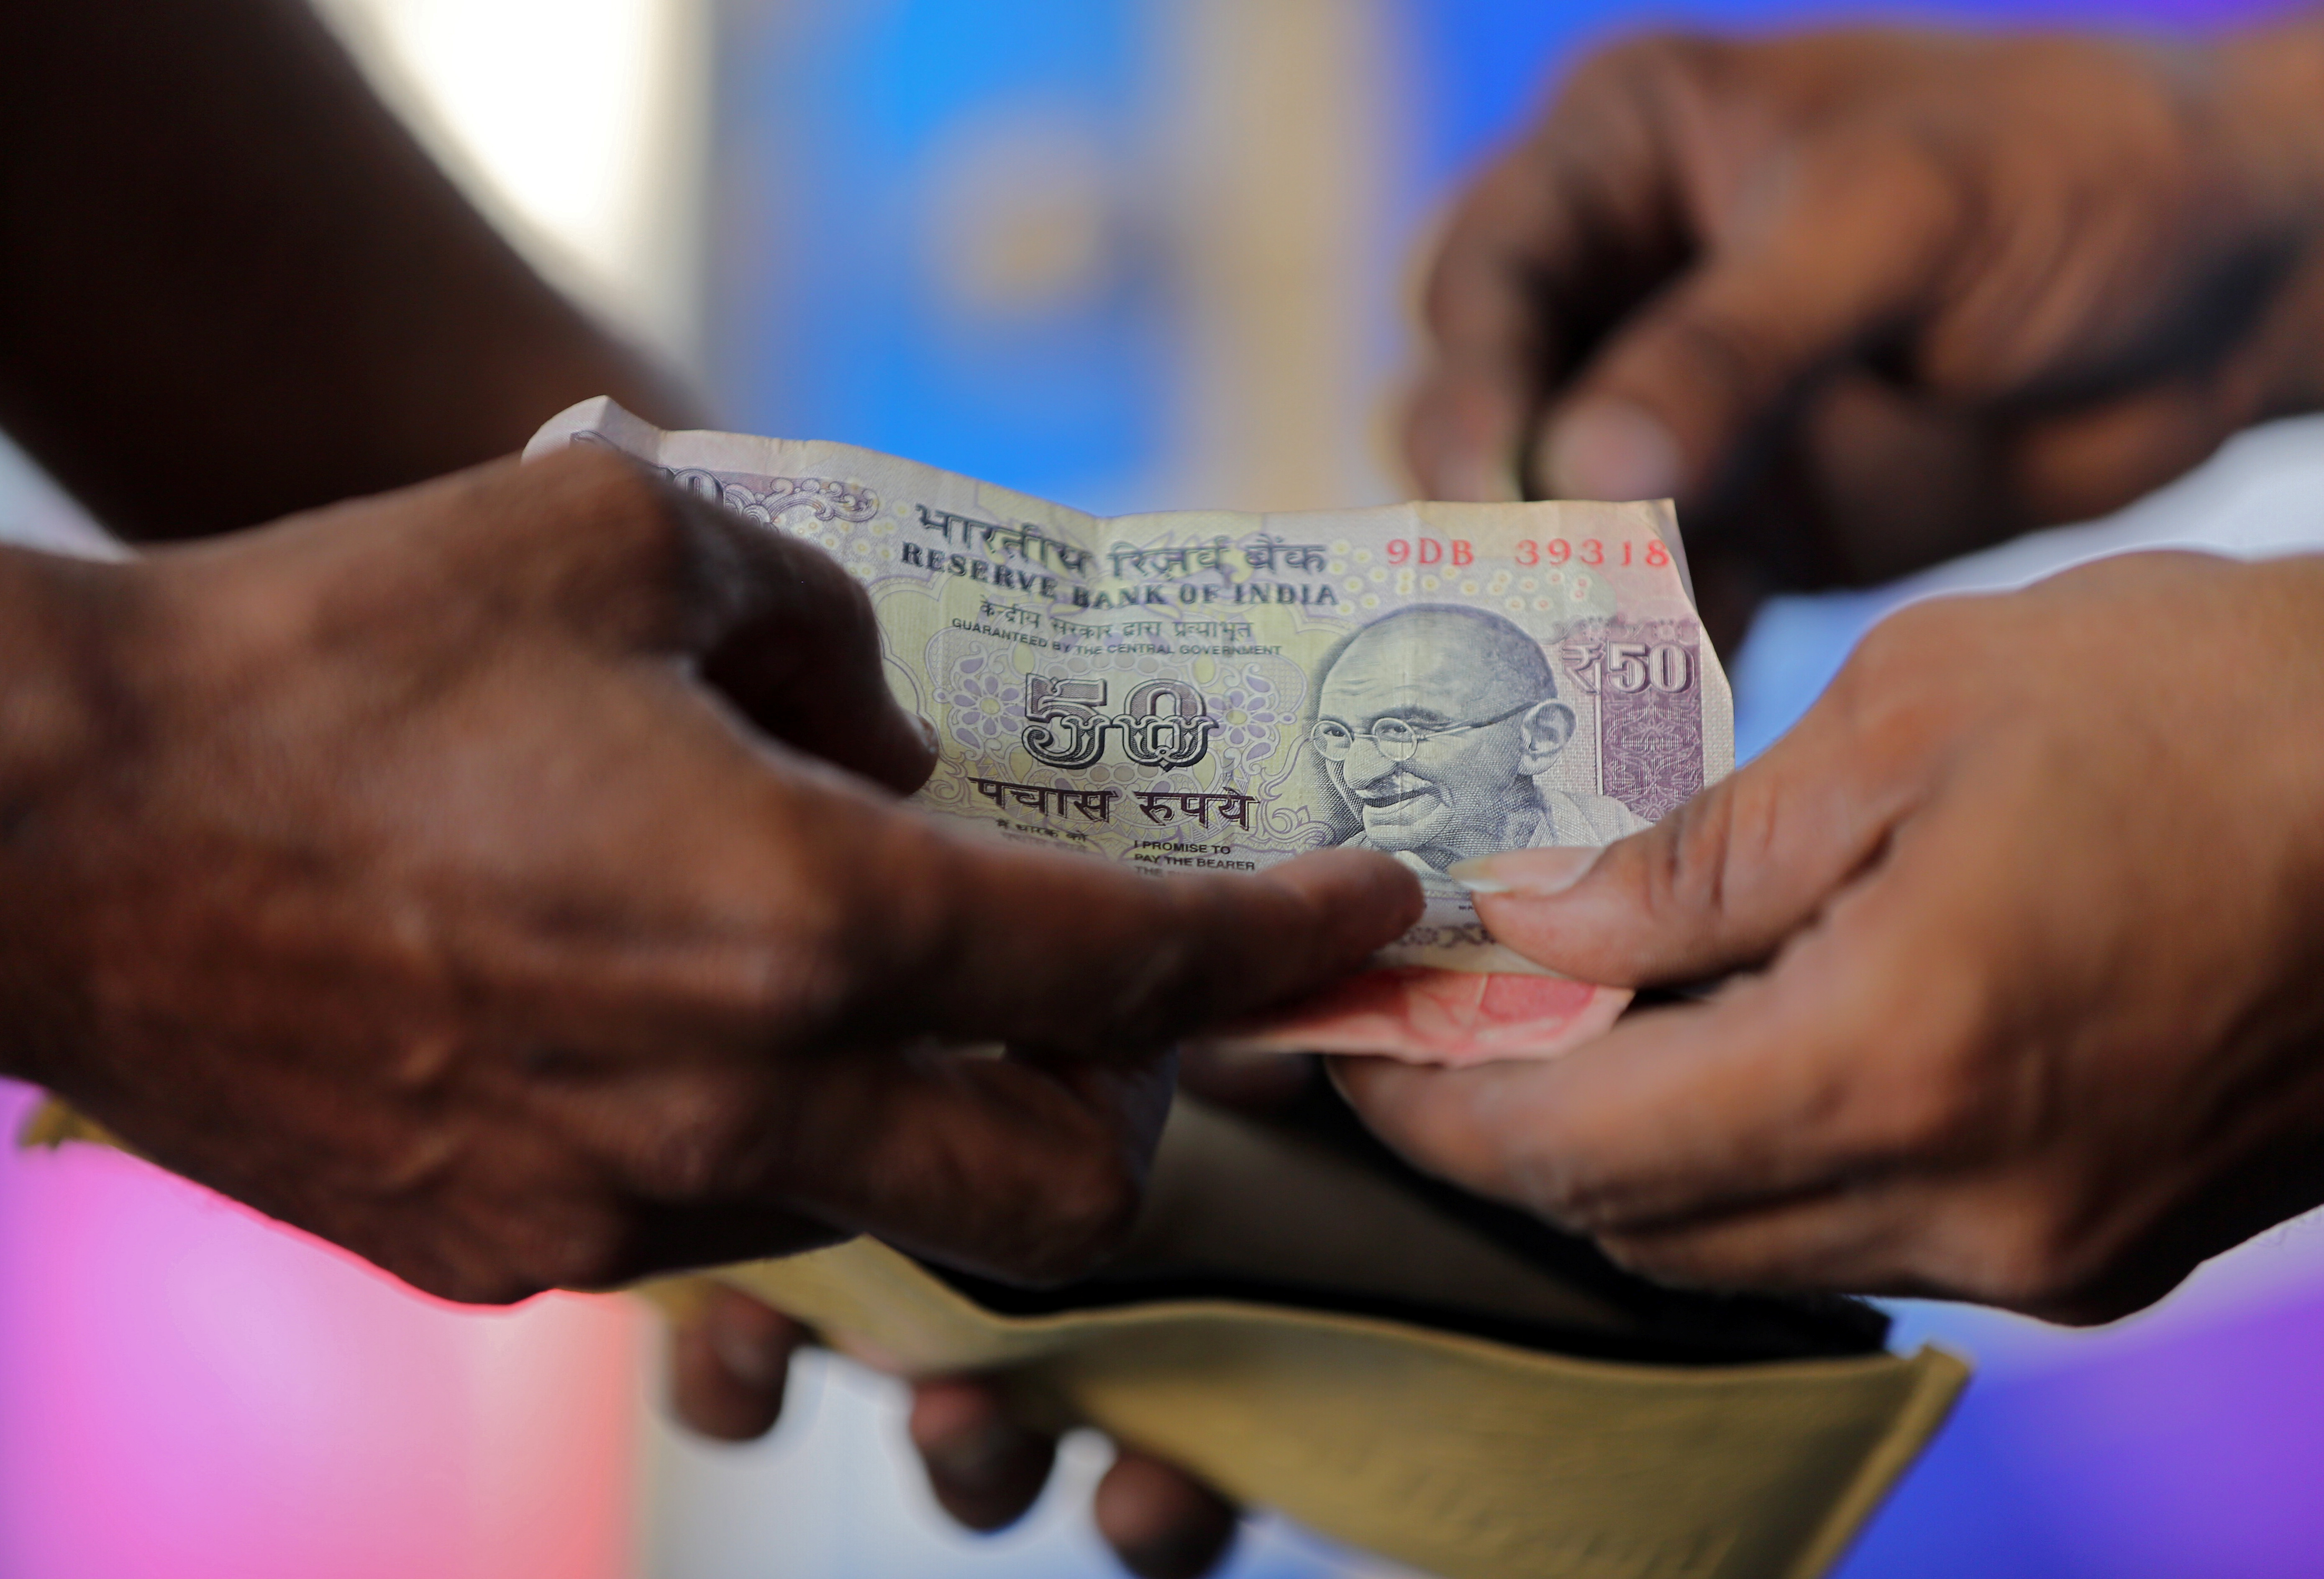 A customer hands a 50-Indian rupee note to an attendant at a fuel station in Ahmedabad